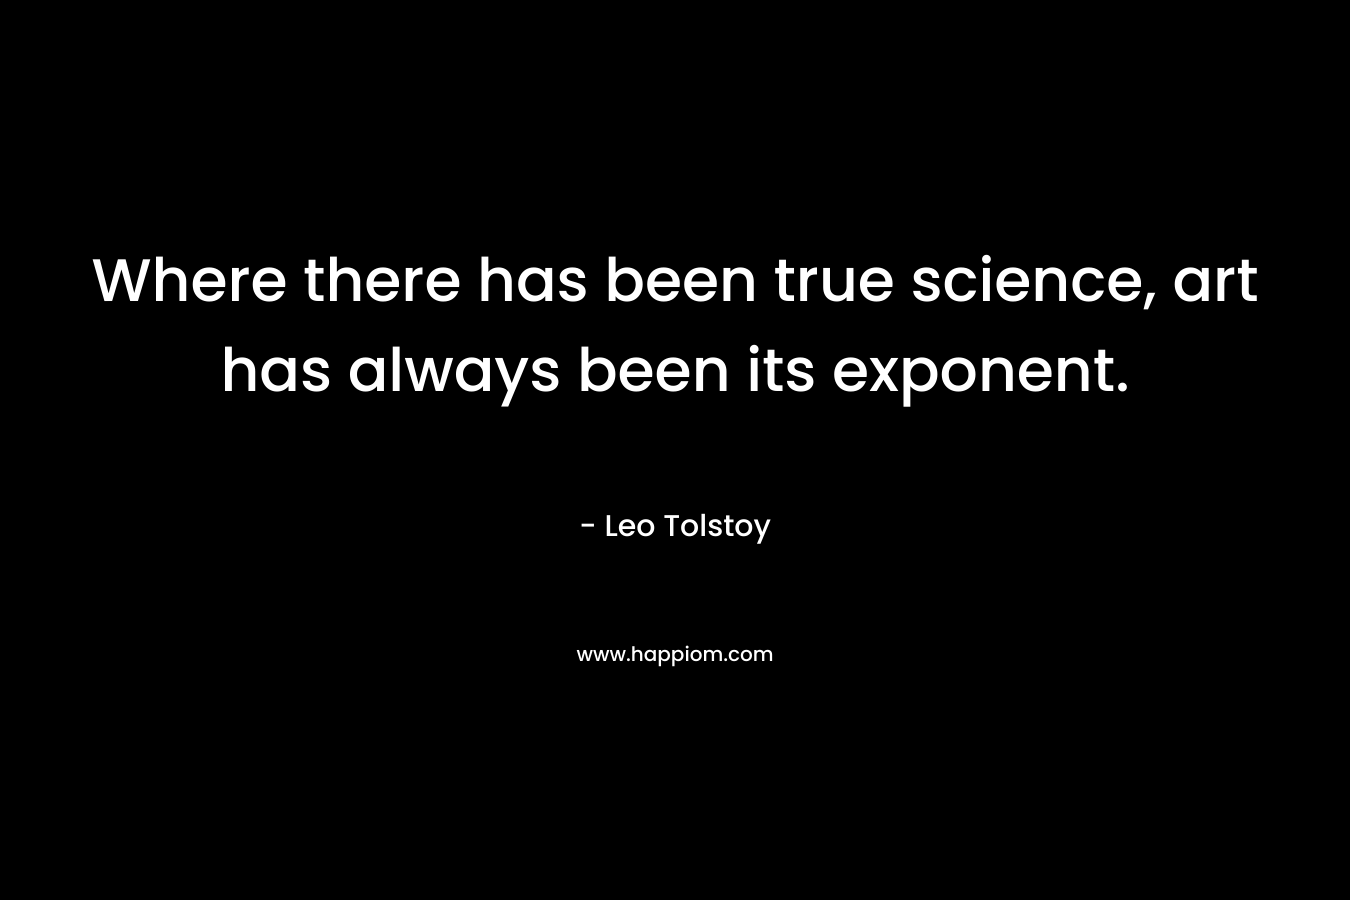 Where there has been true science, art has always been its exponent.